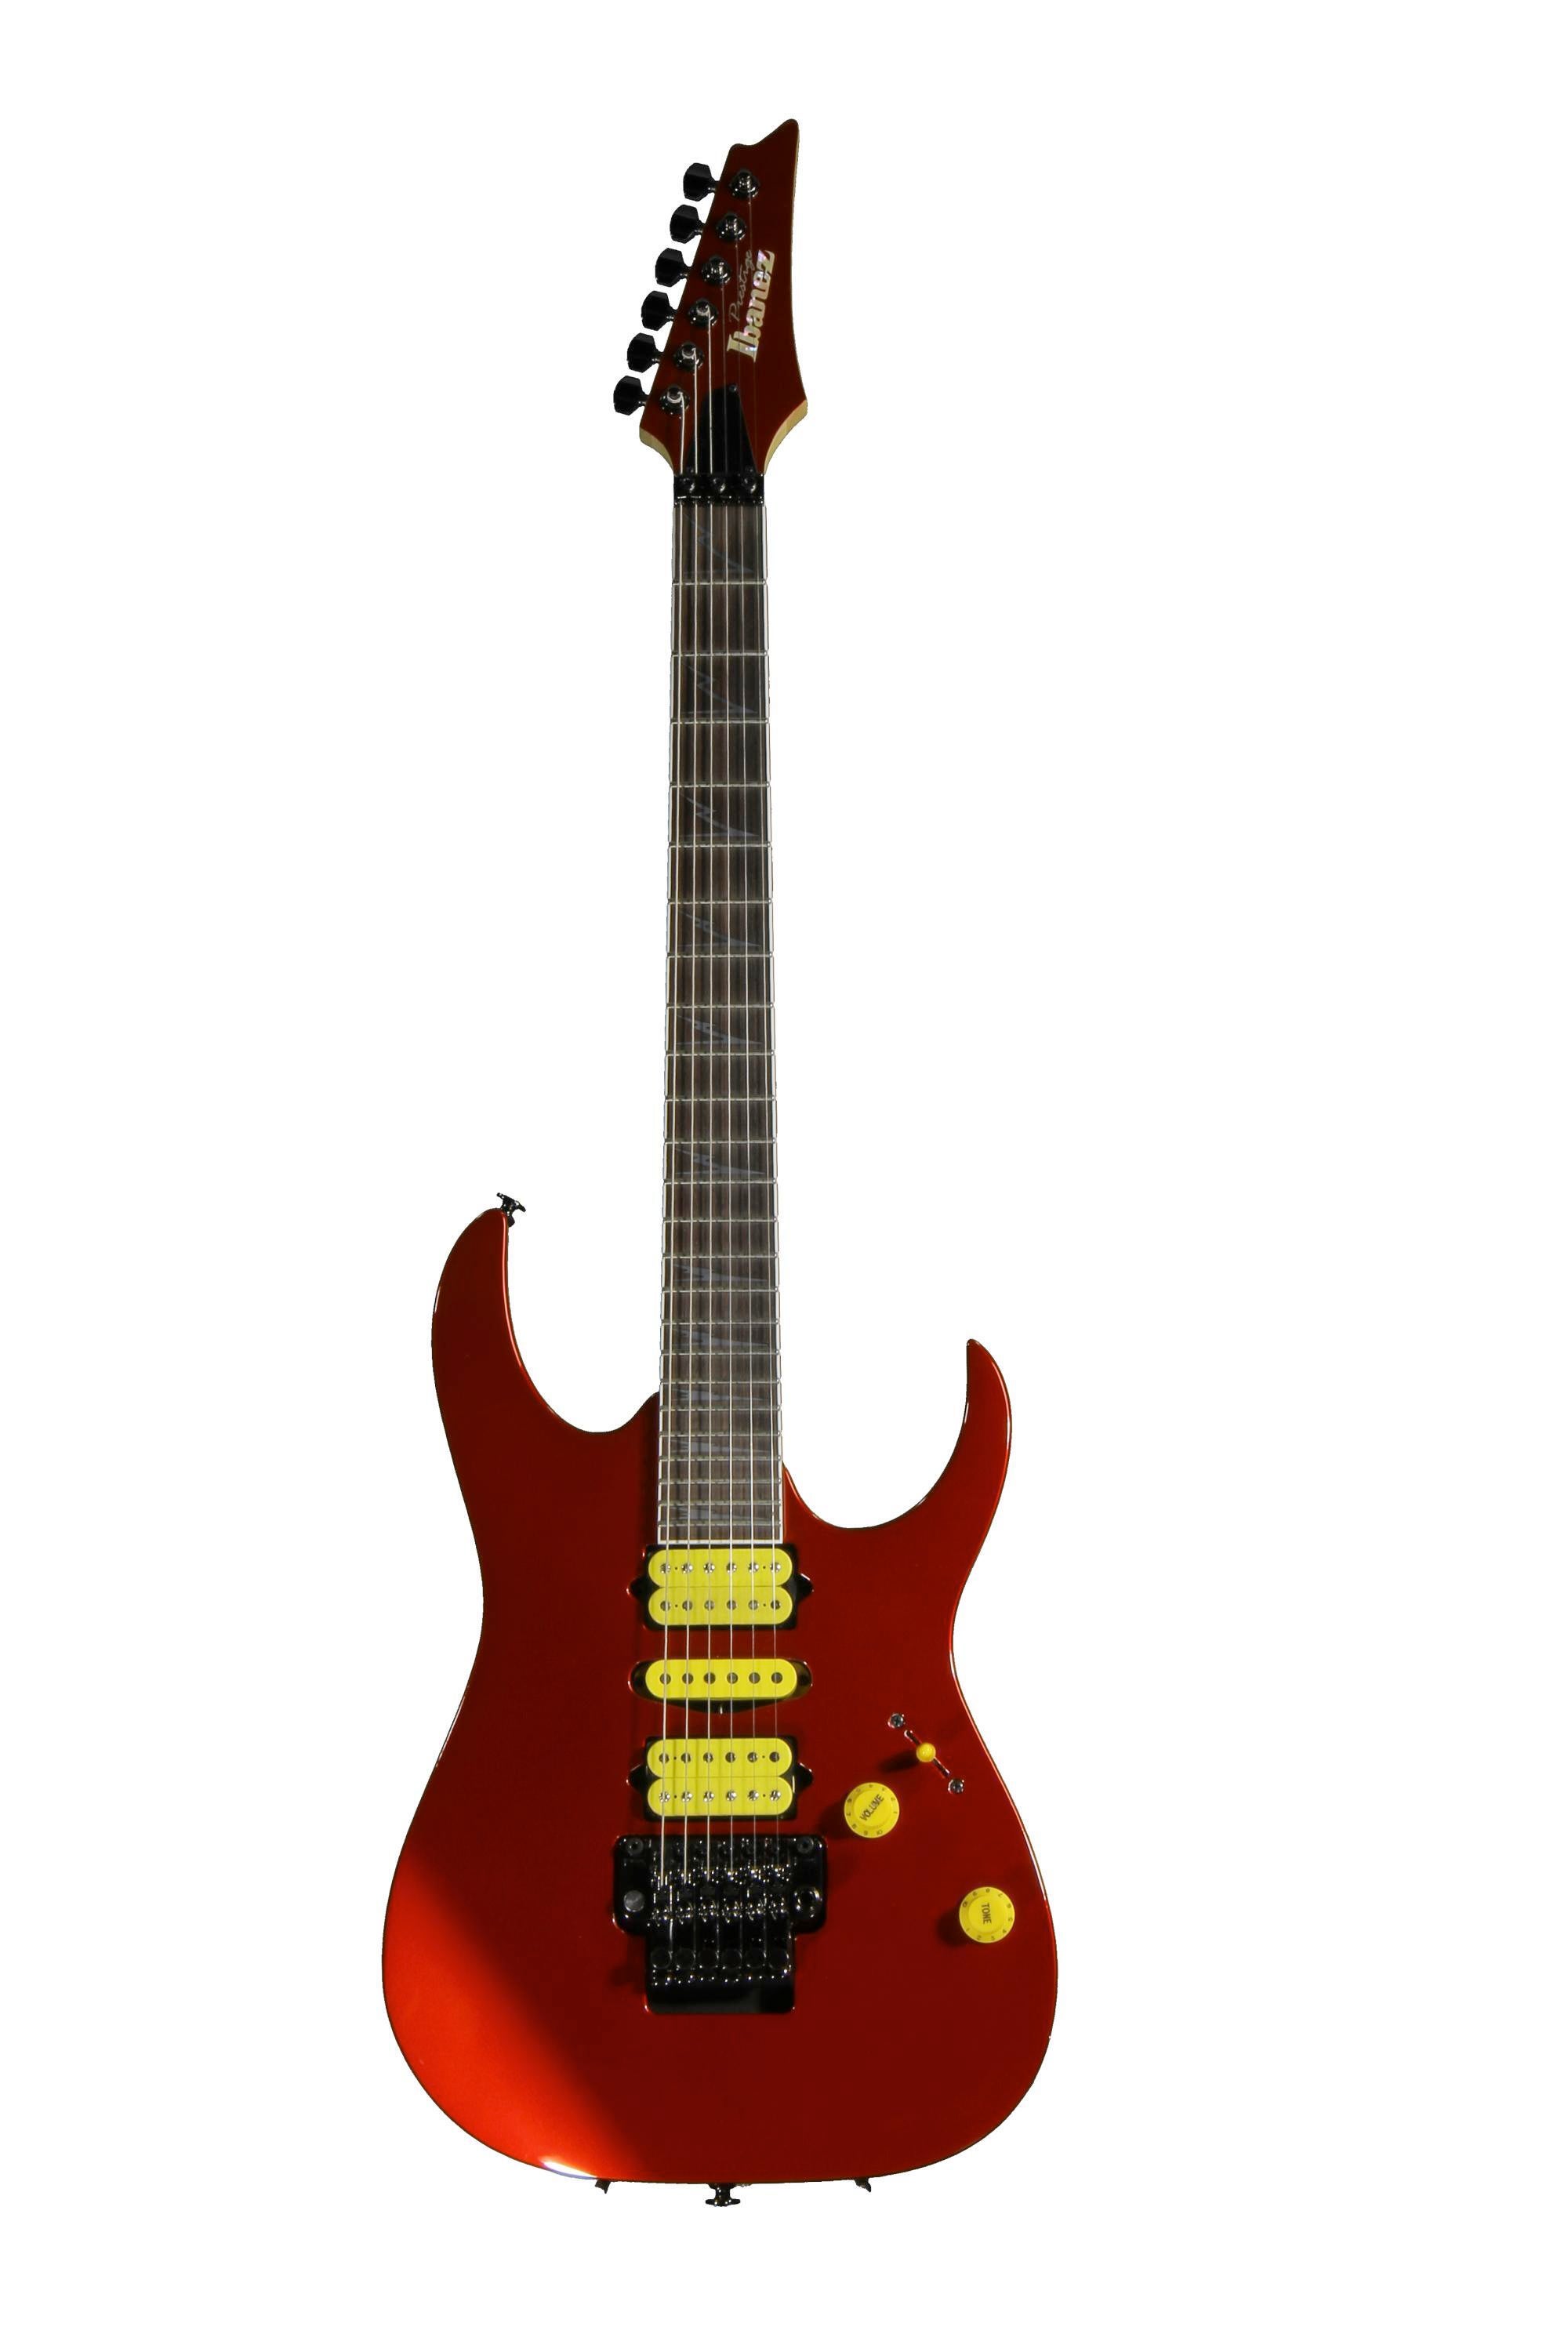 Ibanez RG3570Z - Candy Apple Red